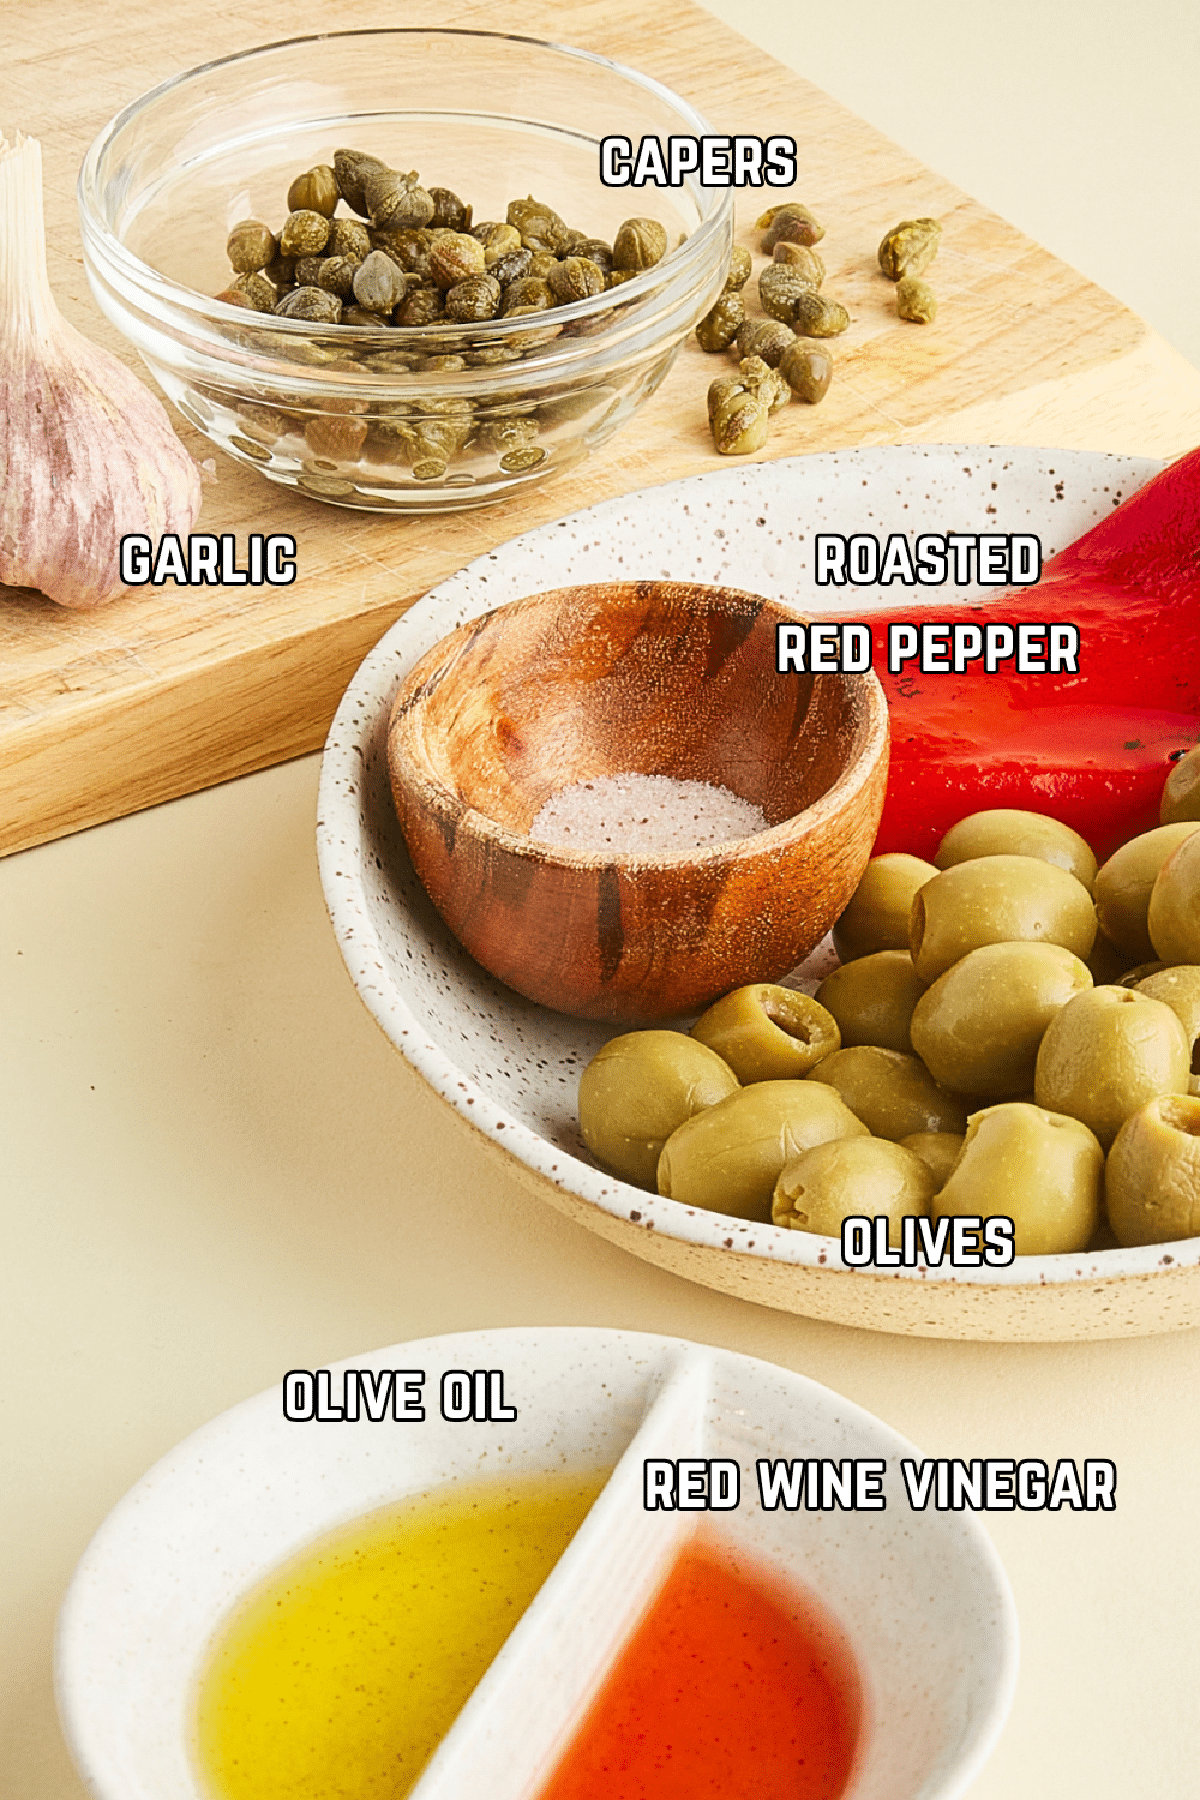 Ingredients to make tapenade sit in various bowls and boards: capers, garlic, roasted red pepper, olives, olive oil, and vinegar.